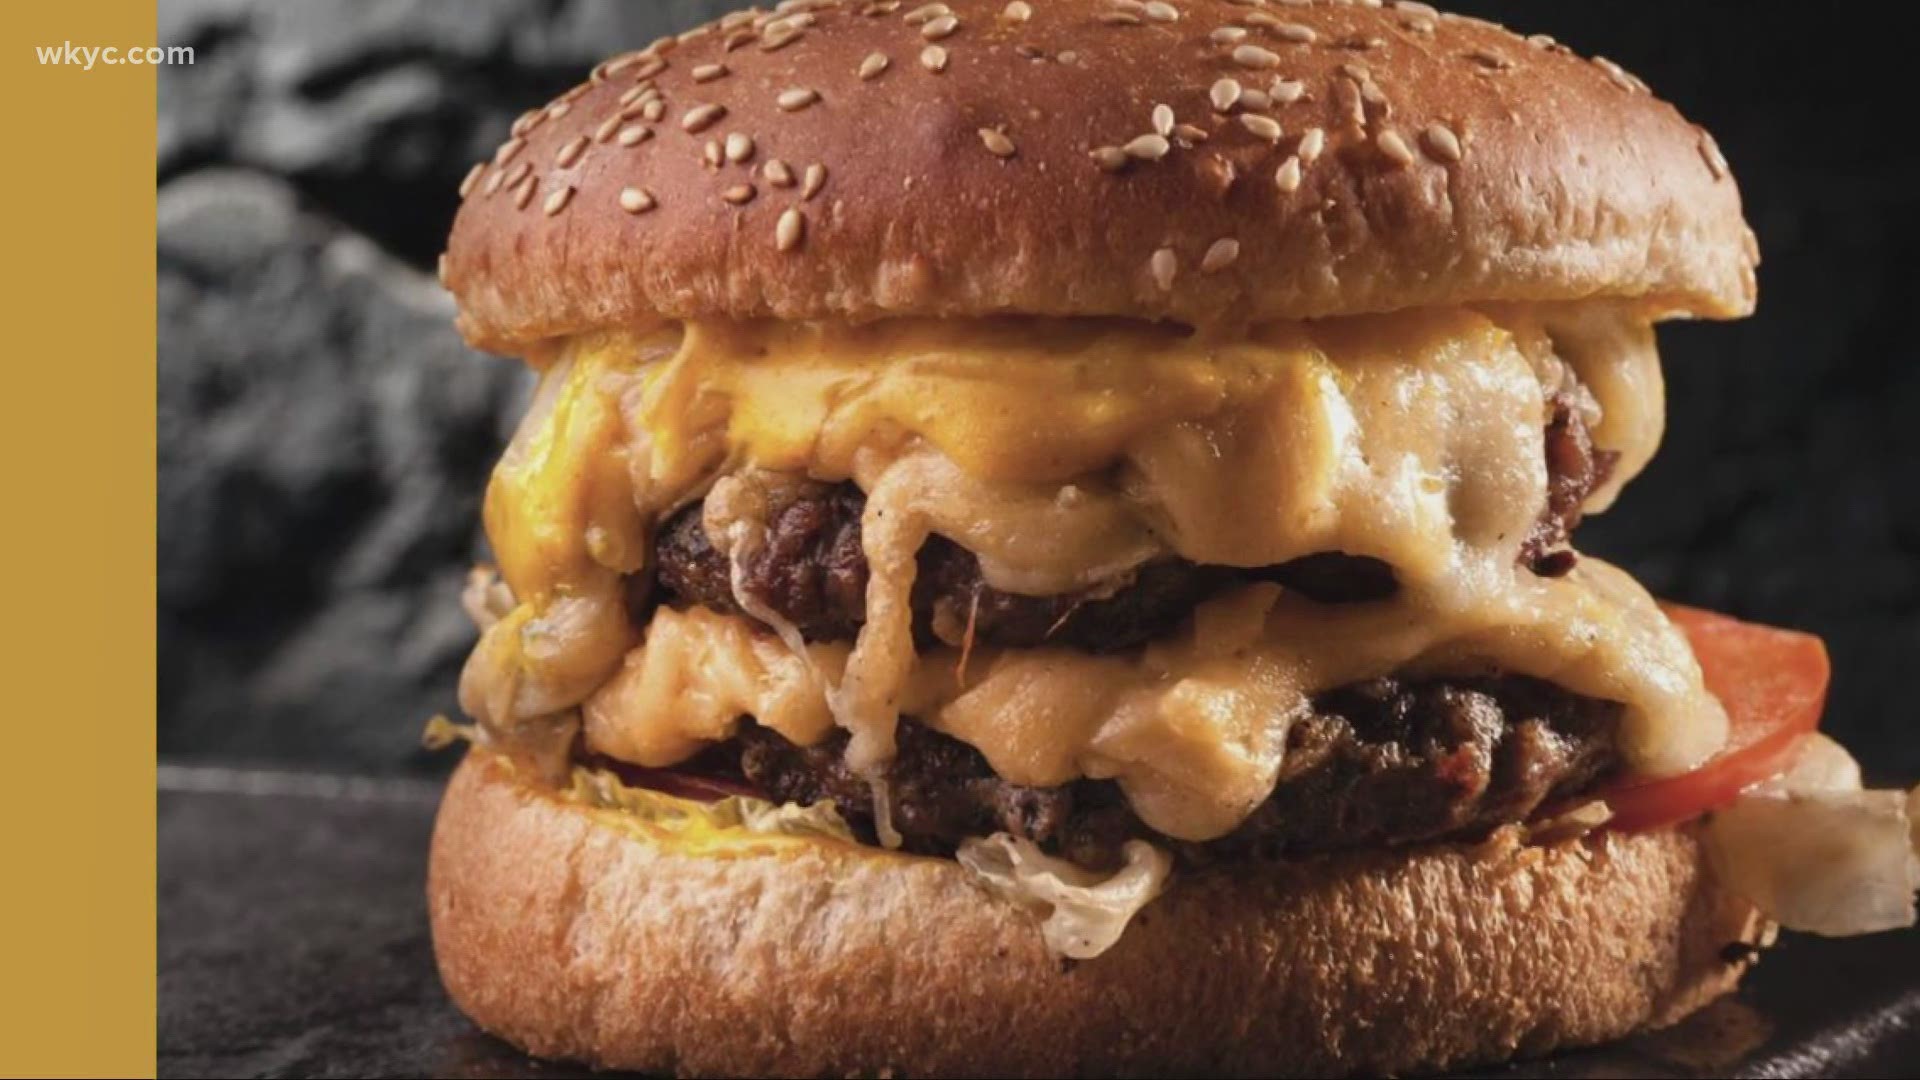 It's a week built for burger lovers! Cleveland Burger Week is here!